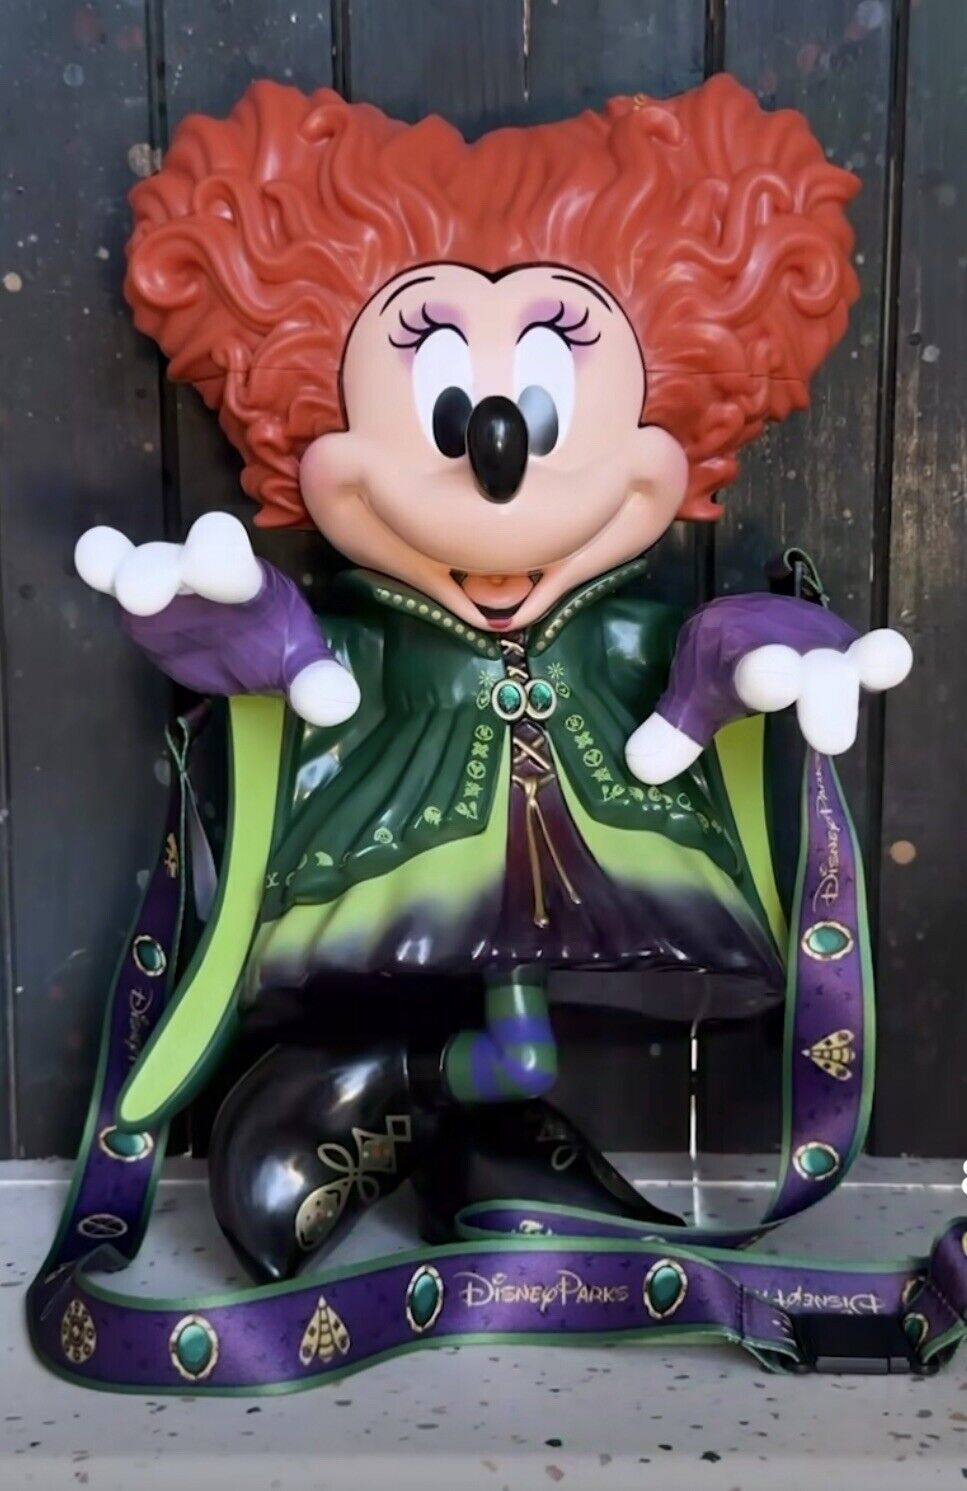 New Hocus Pocus Sipper Featuring Minnie Mouse as Winifred Sanderson Now  Available at Disneyland Resort - WDW News Today